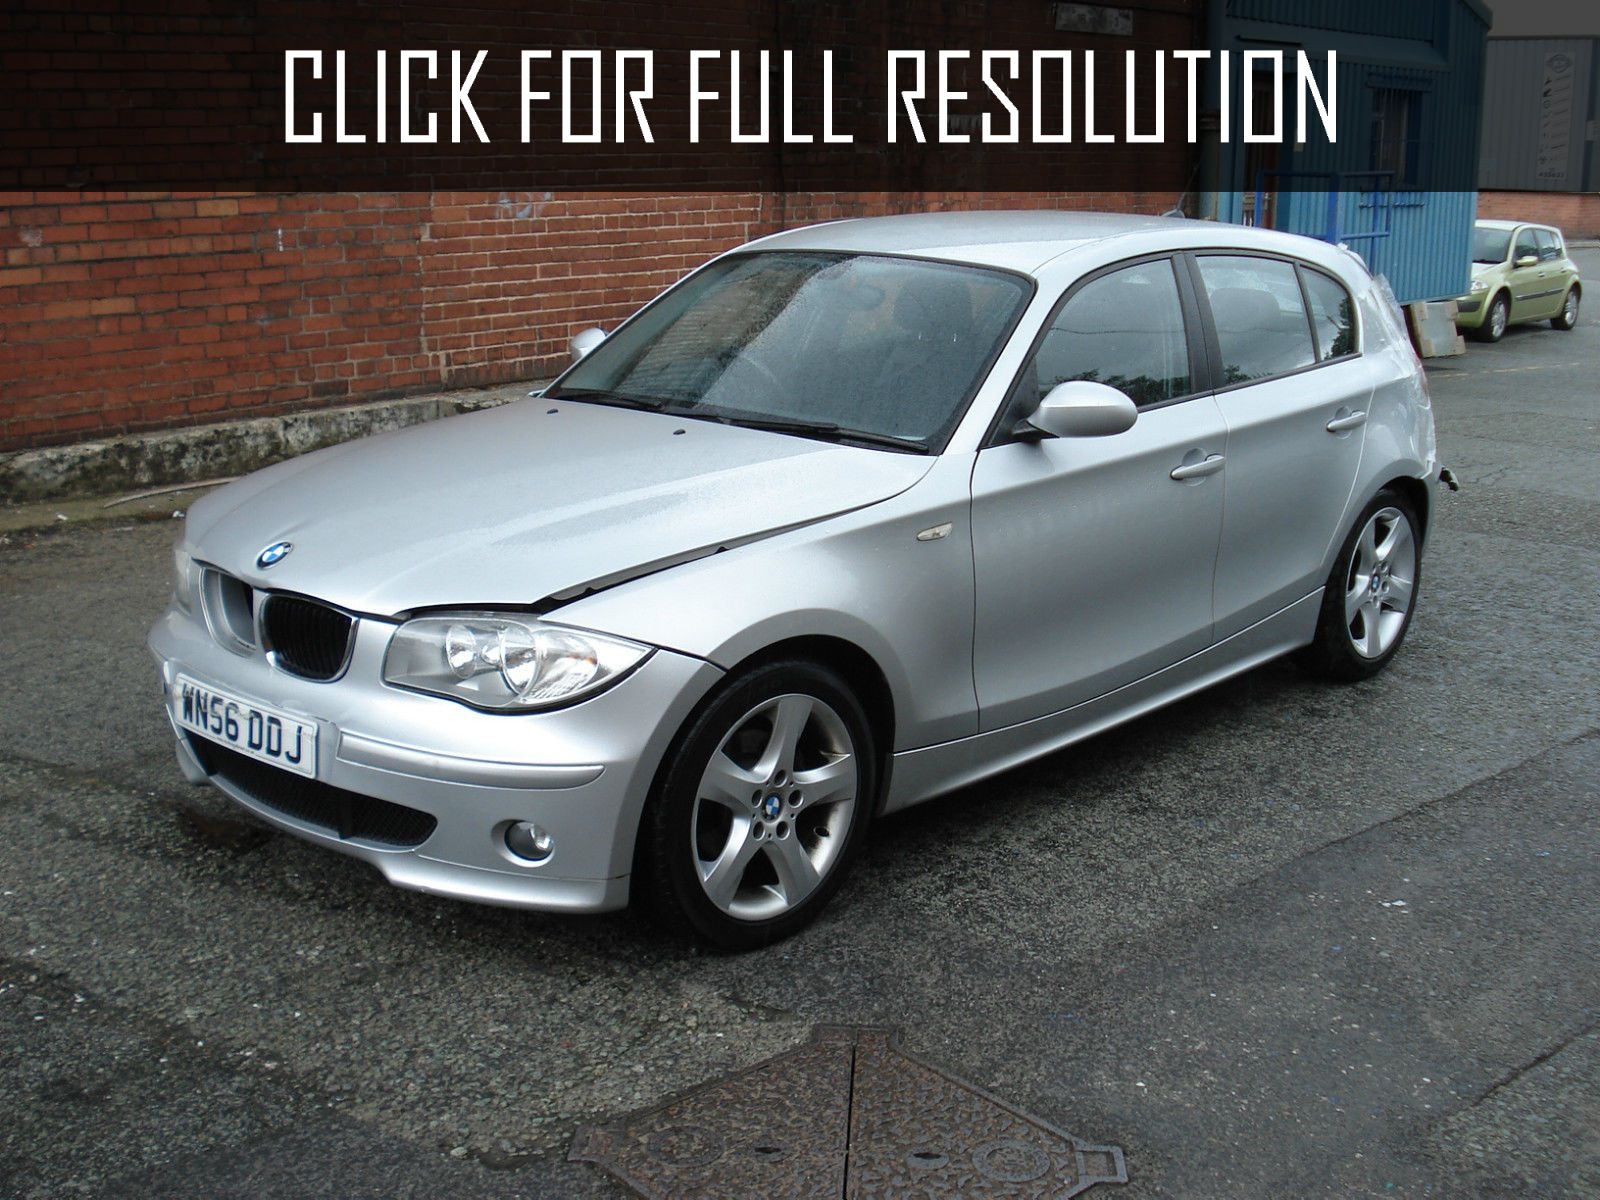 2006 Bmw 1 Series news, reviews, msrp, ratings with